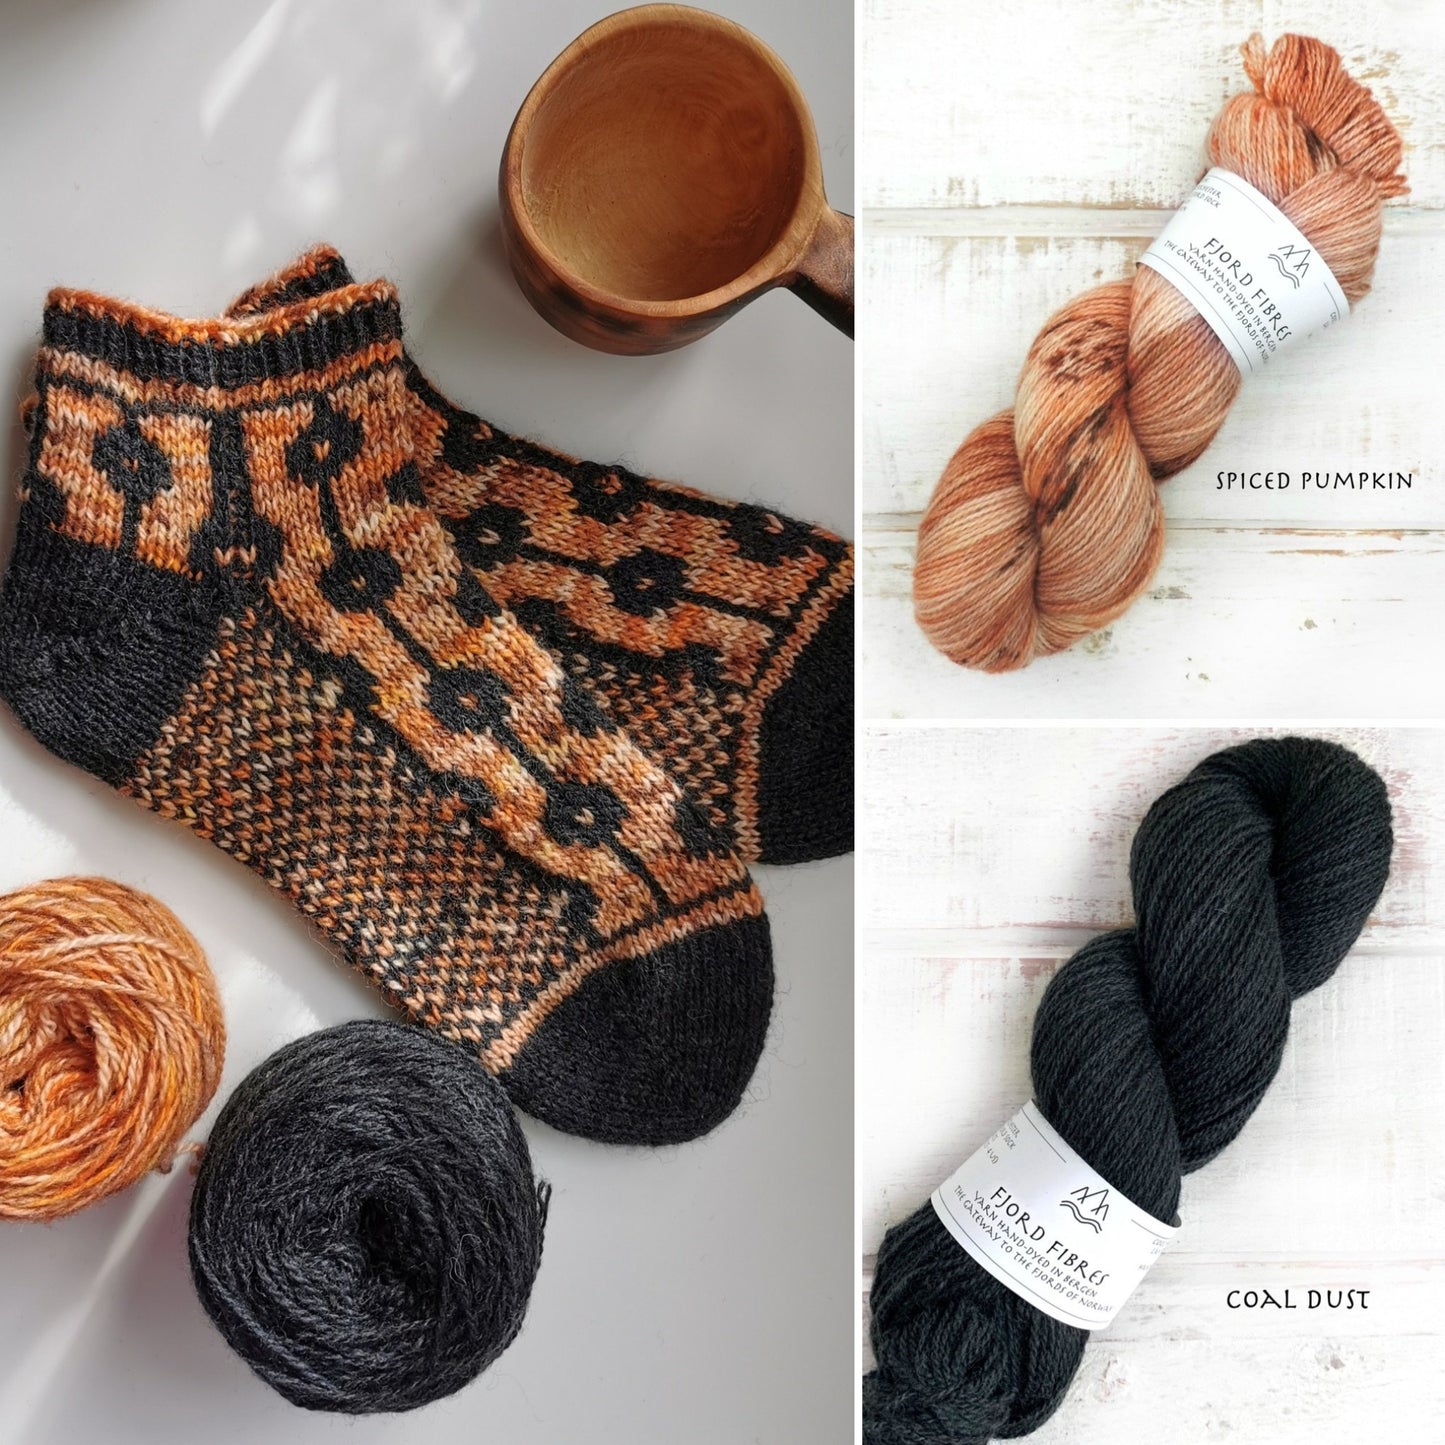 Dotted Line Socks Kit - Spiced Pumpkin/Coal Dust - Yarn and Printed Pattern in English/Norwegian